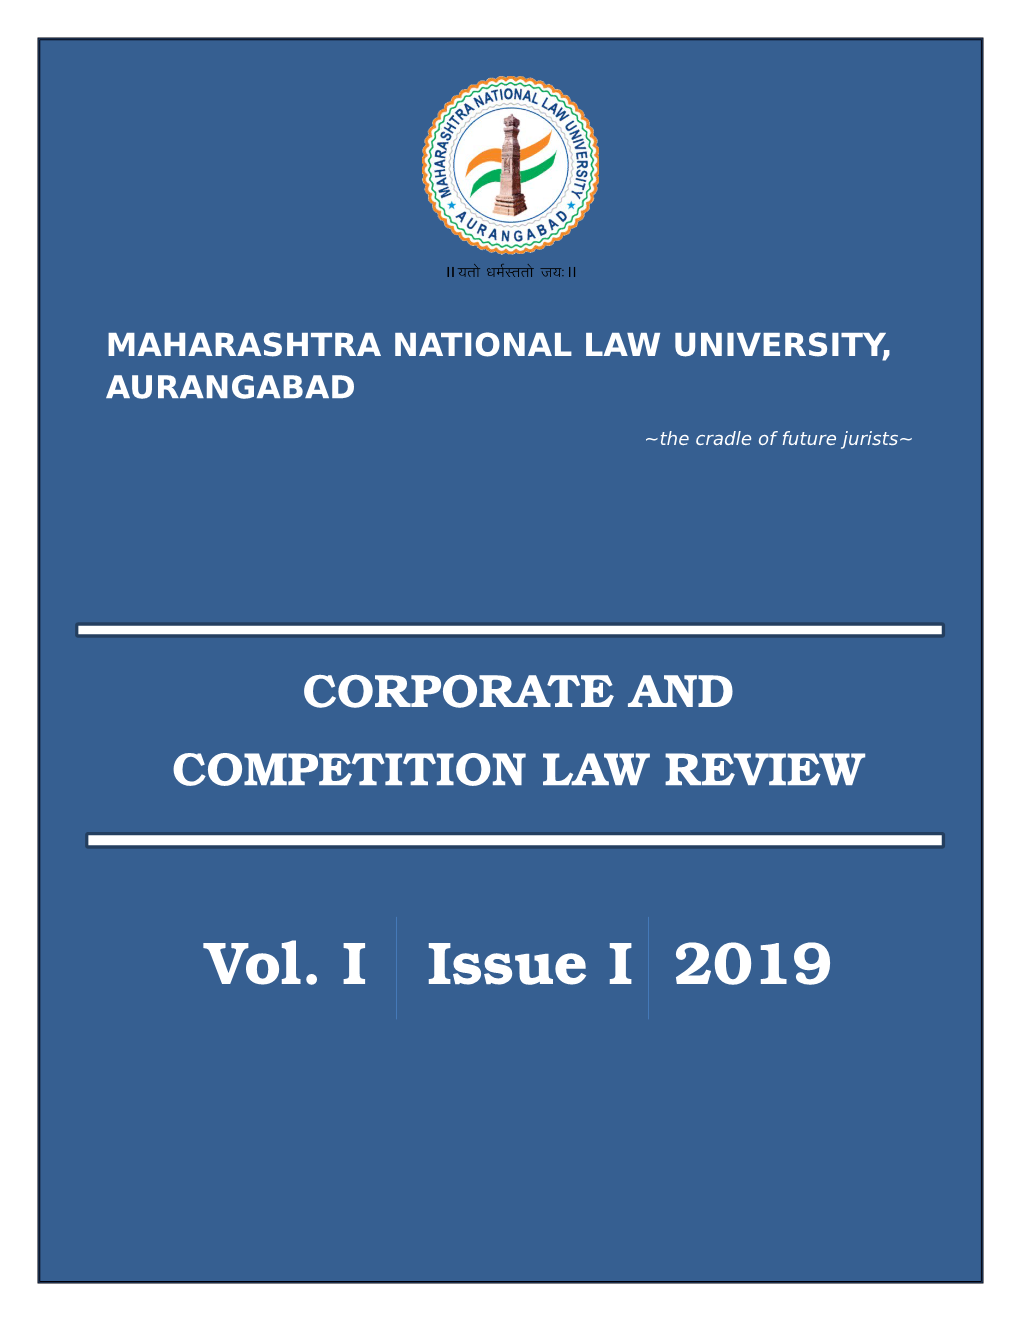 Vol. I Issue I 2019 MNLUA CORPORATE and COMPETITION LAW REVIEW